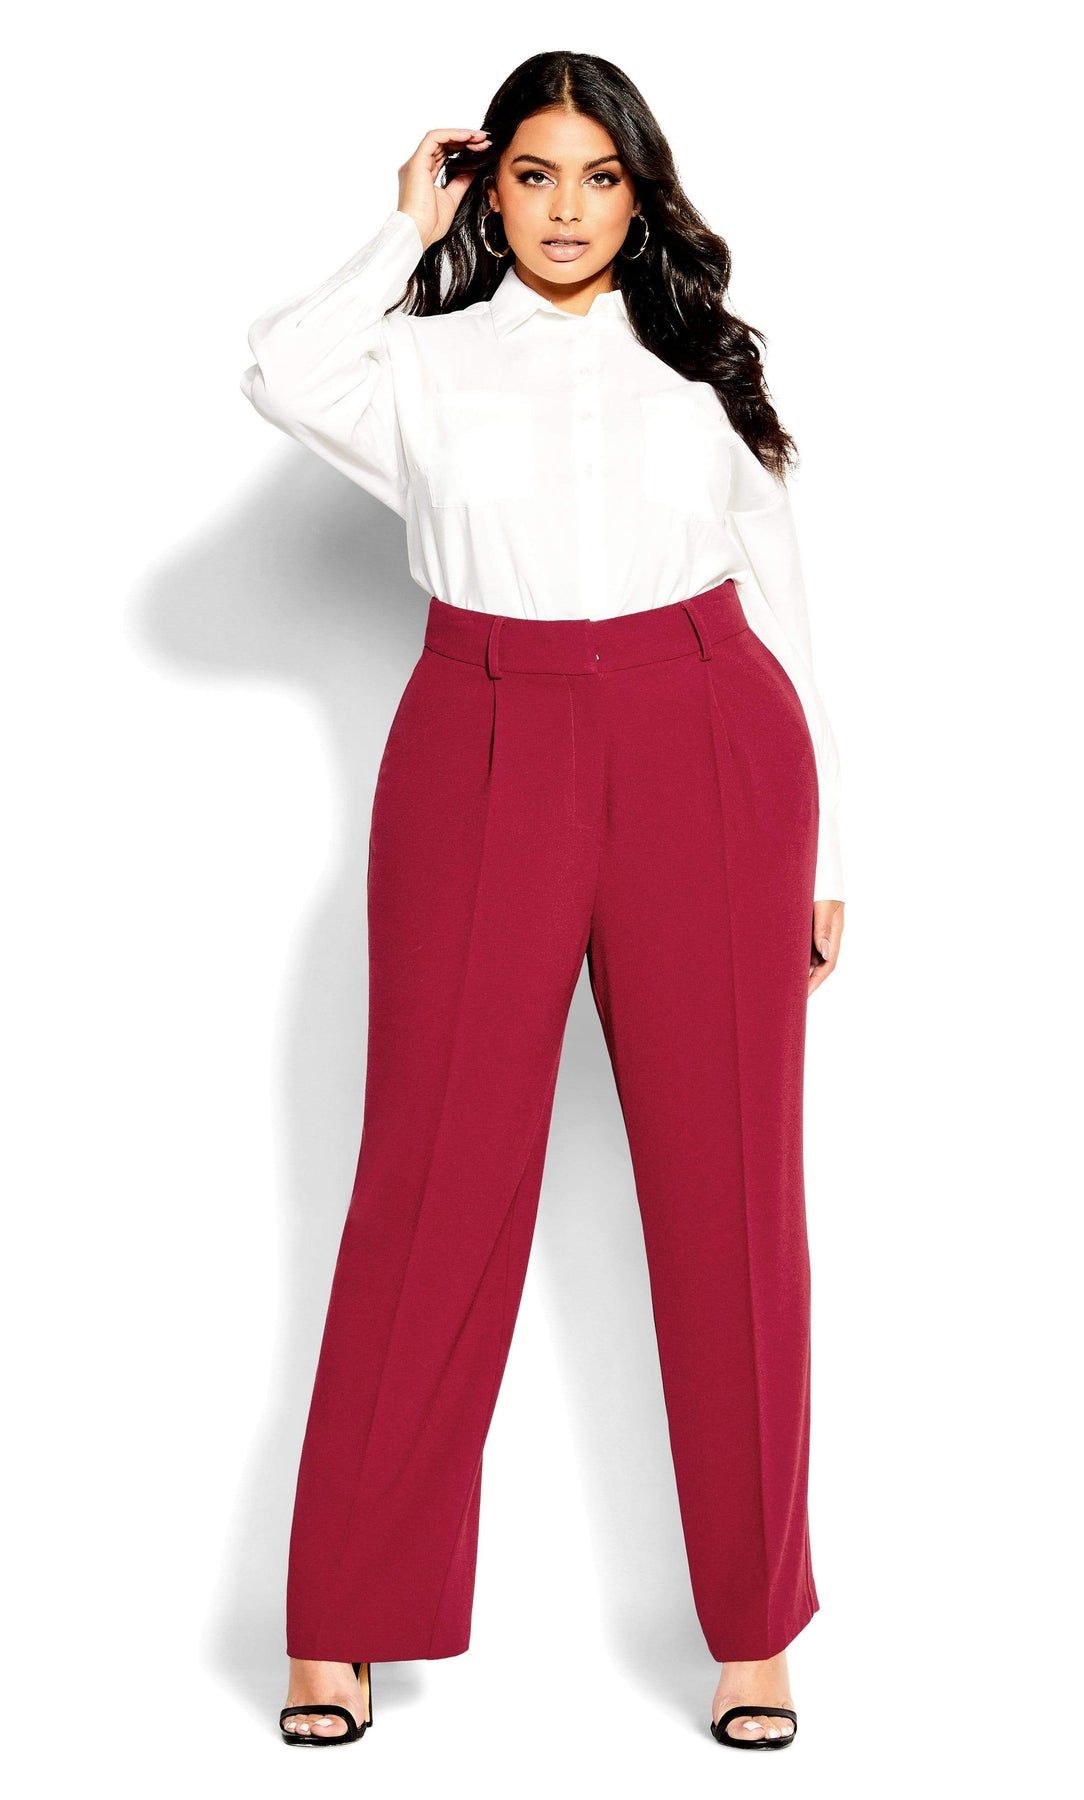 Frankie Morello Red Trousers Ideas to Wear Red Pants on Stylevore